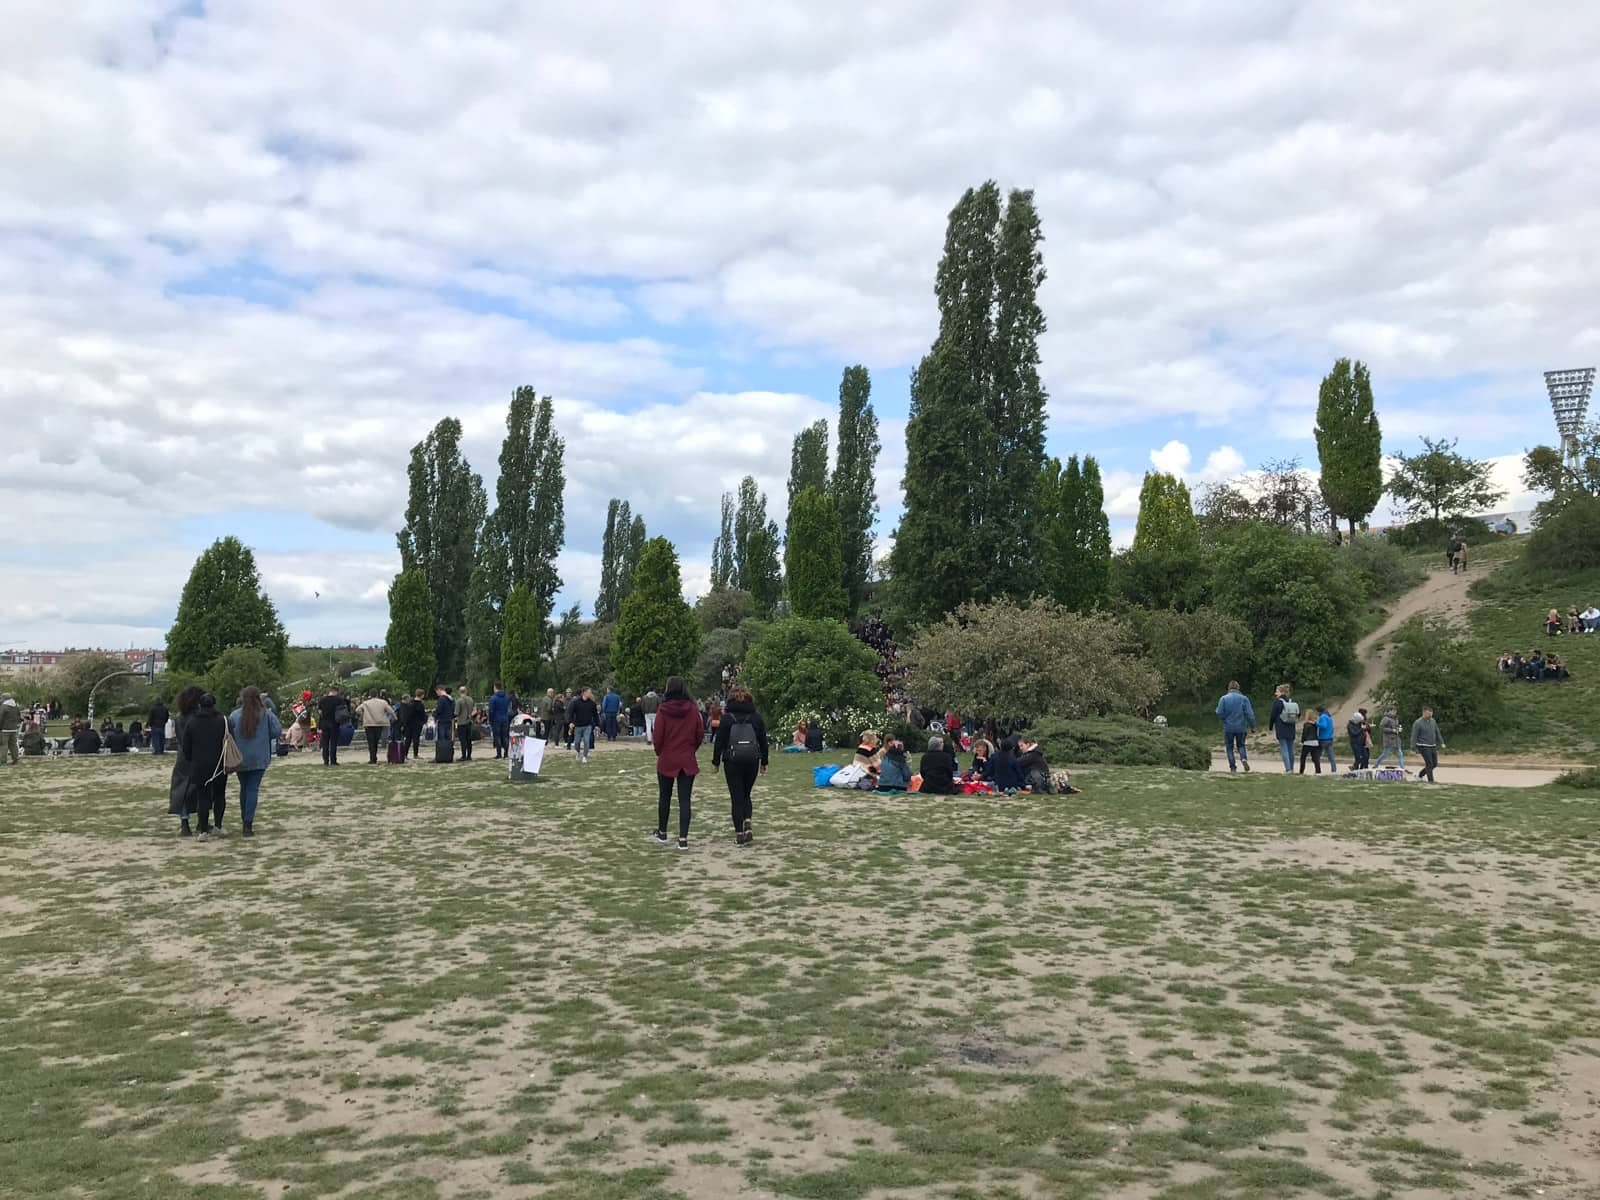 A barren area of a park where the grass is withering away, with people sitting down for a picnic and some walking